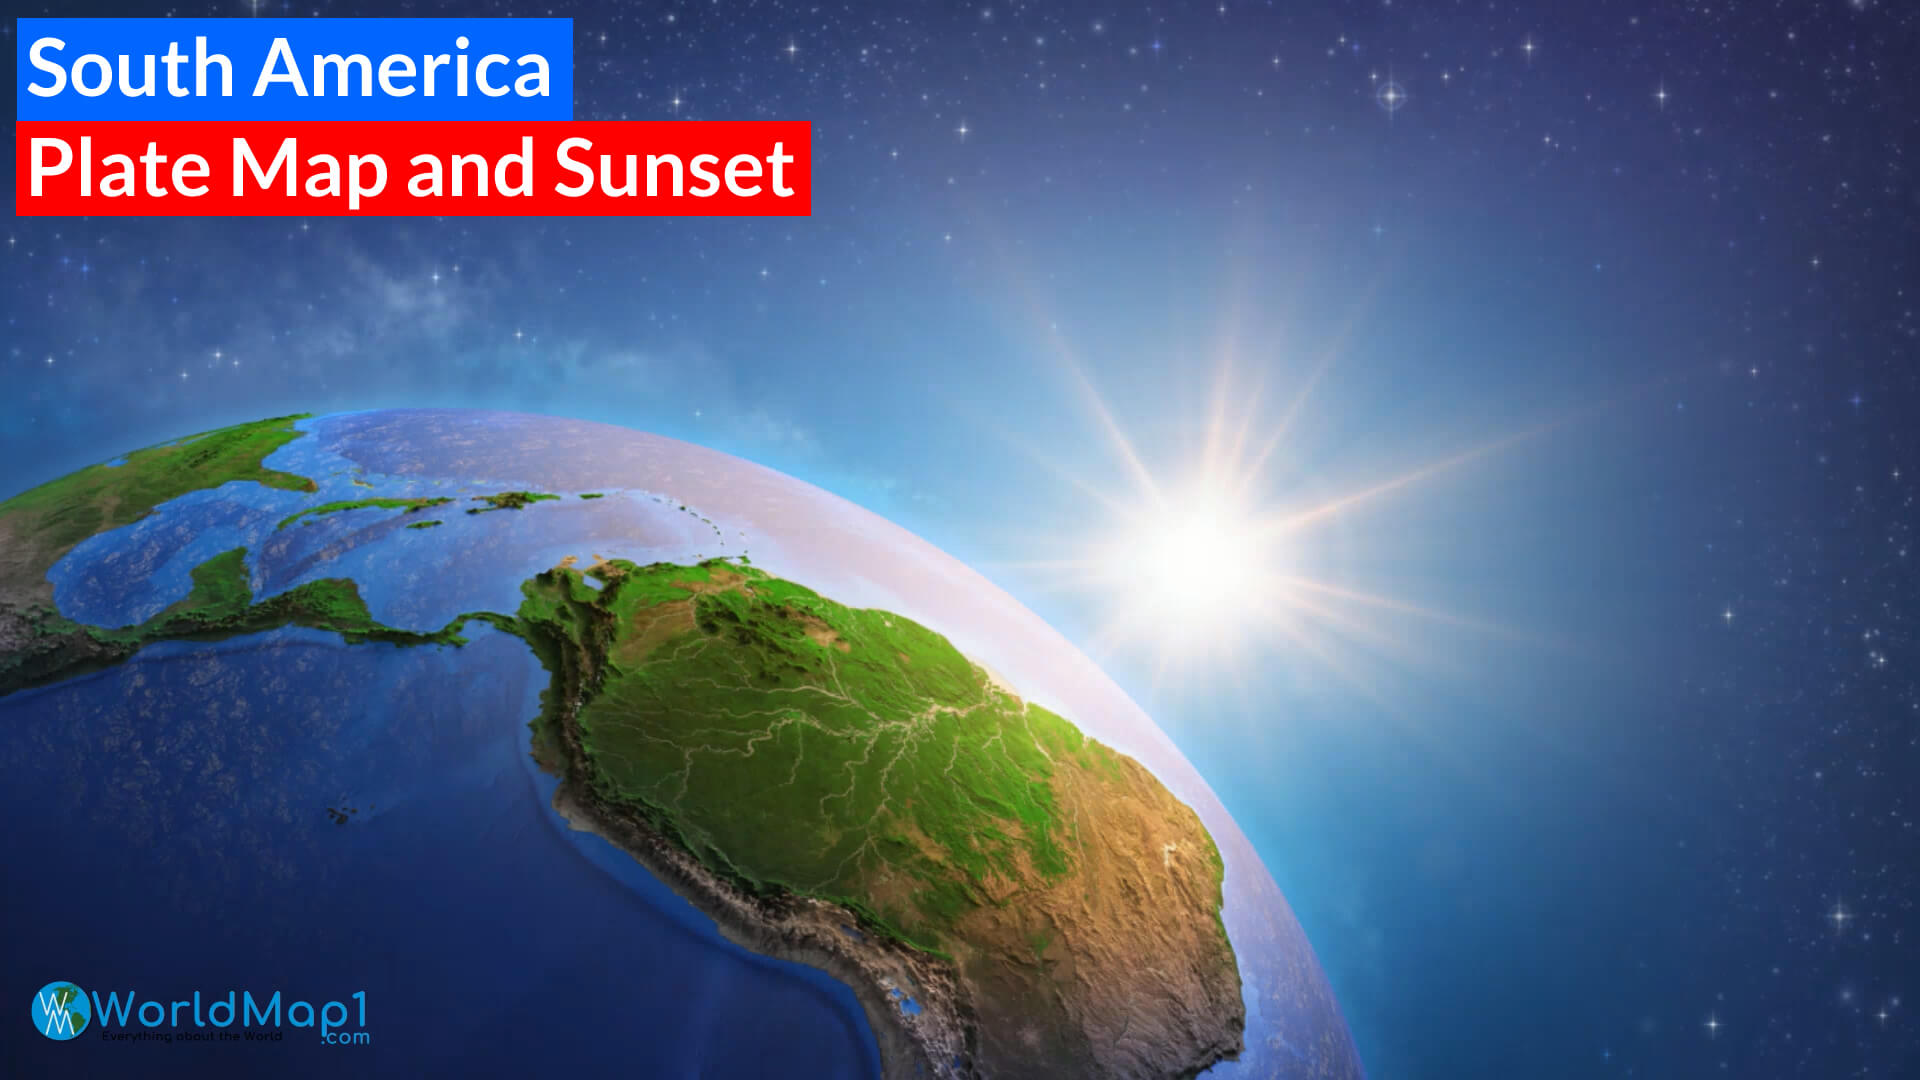 South America Plate Map and Sunset